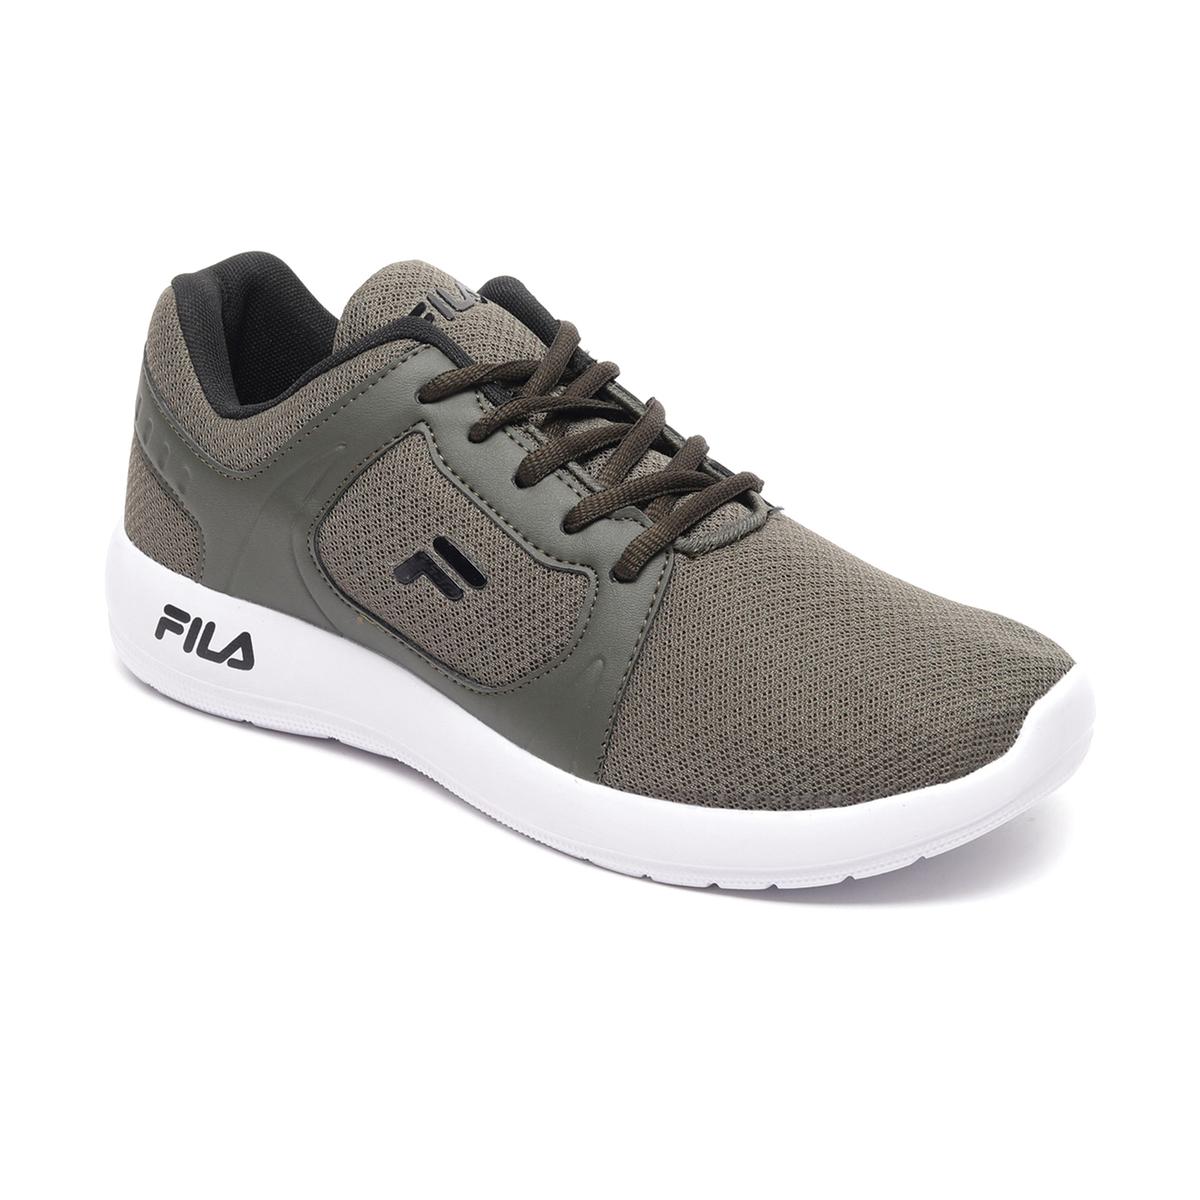 Update more than 144 fila sneakers for men latest